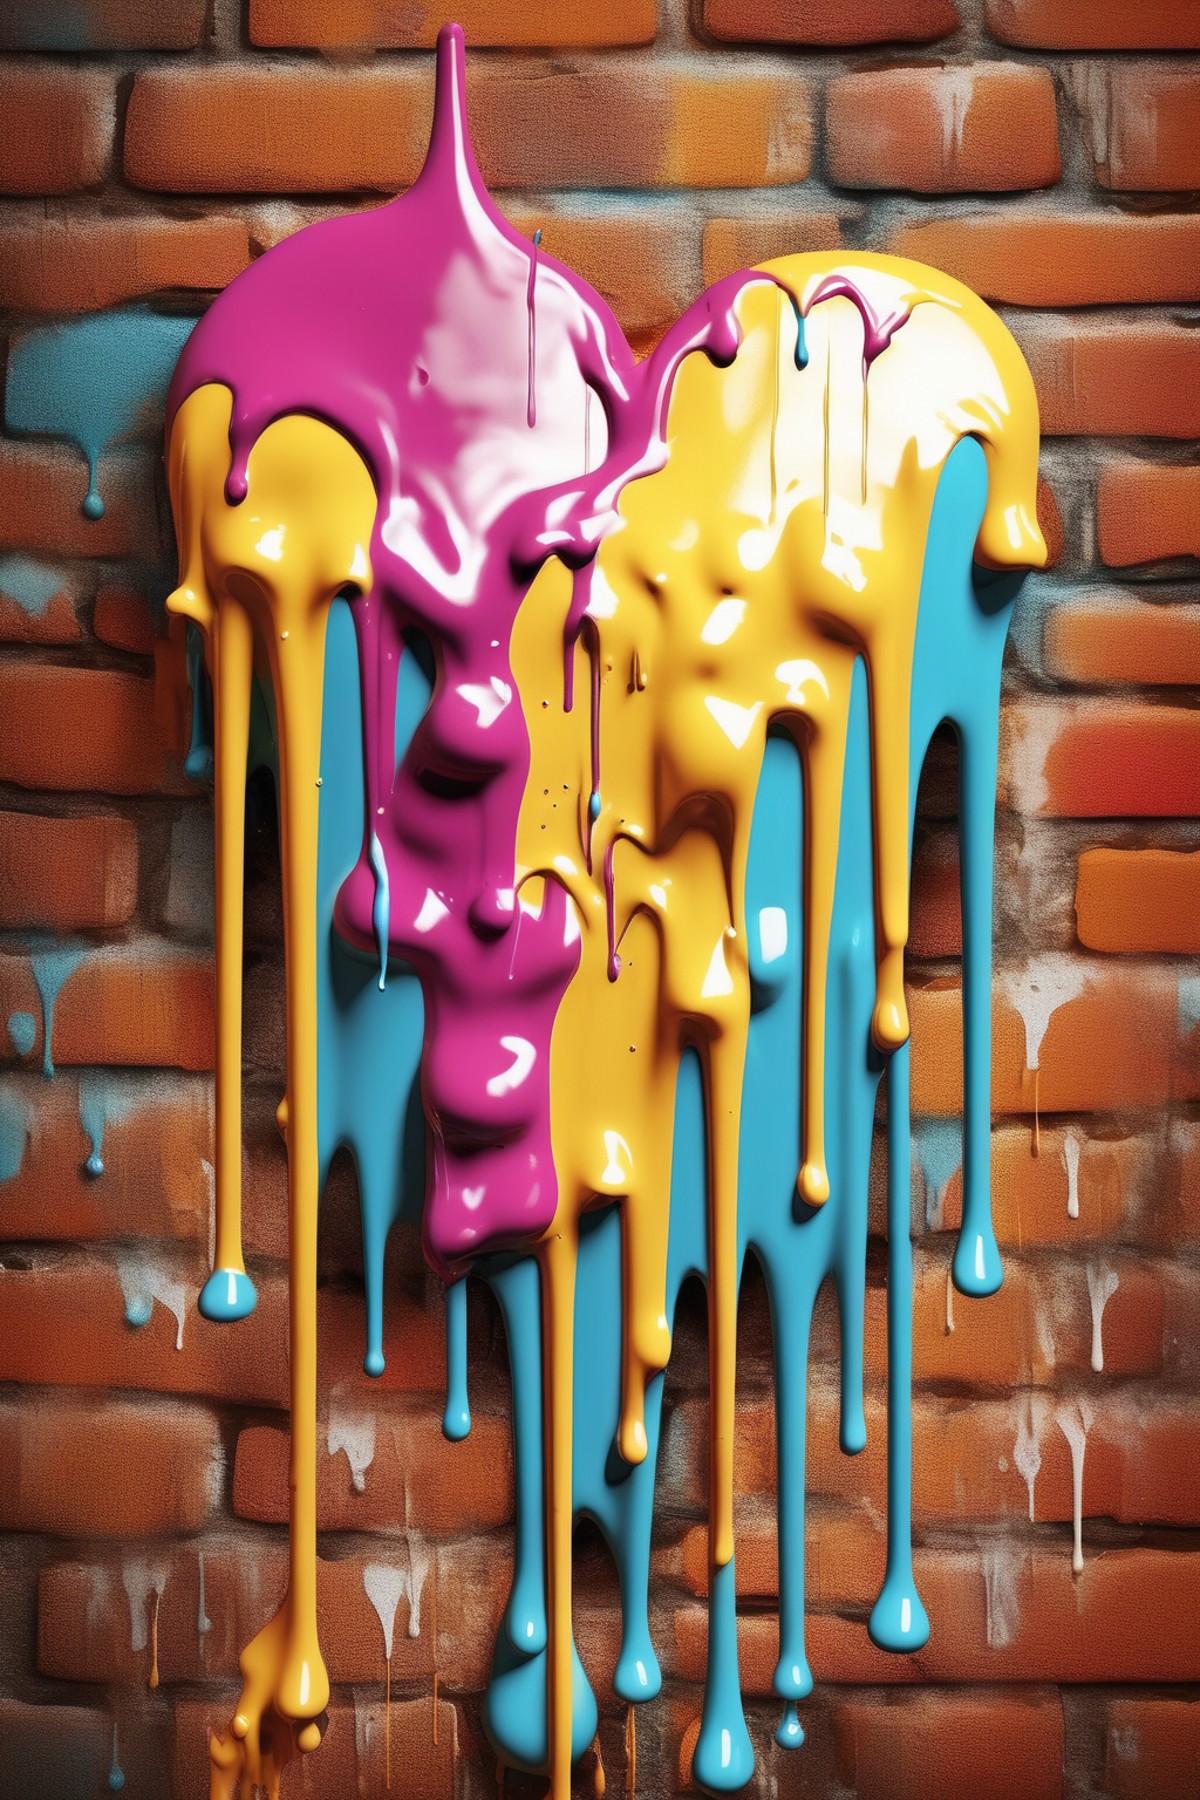 <lora:Dripping Art:1>Dripping Art - Design an artistic image that symbolizes love, using a dripping paint effect to enhanc...